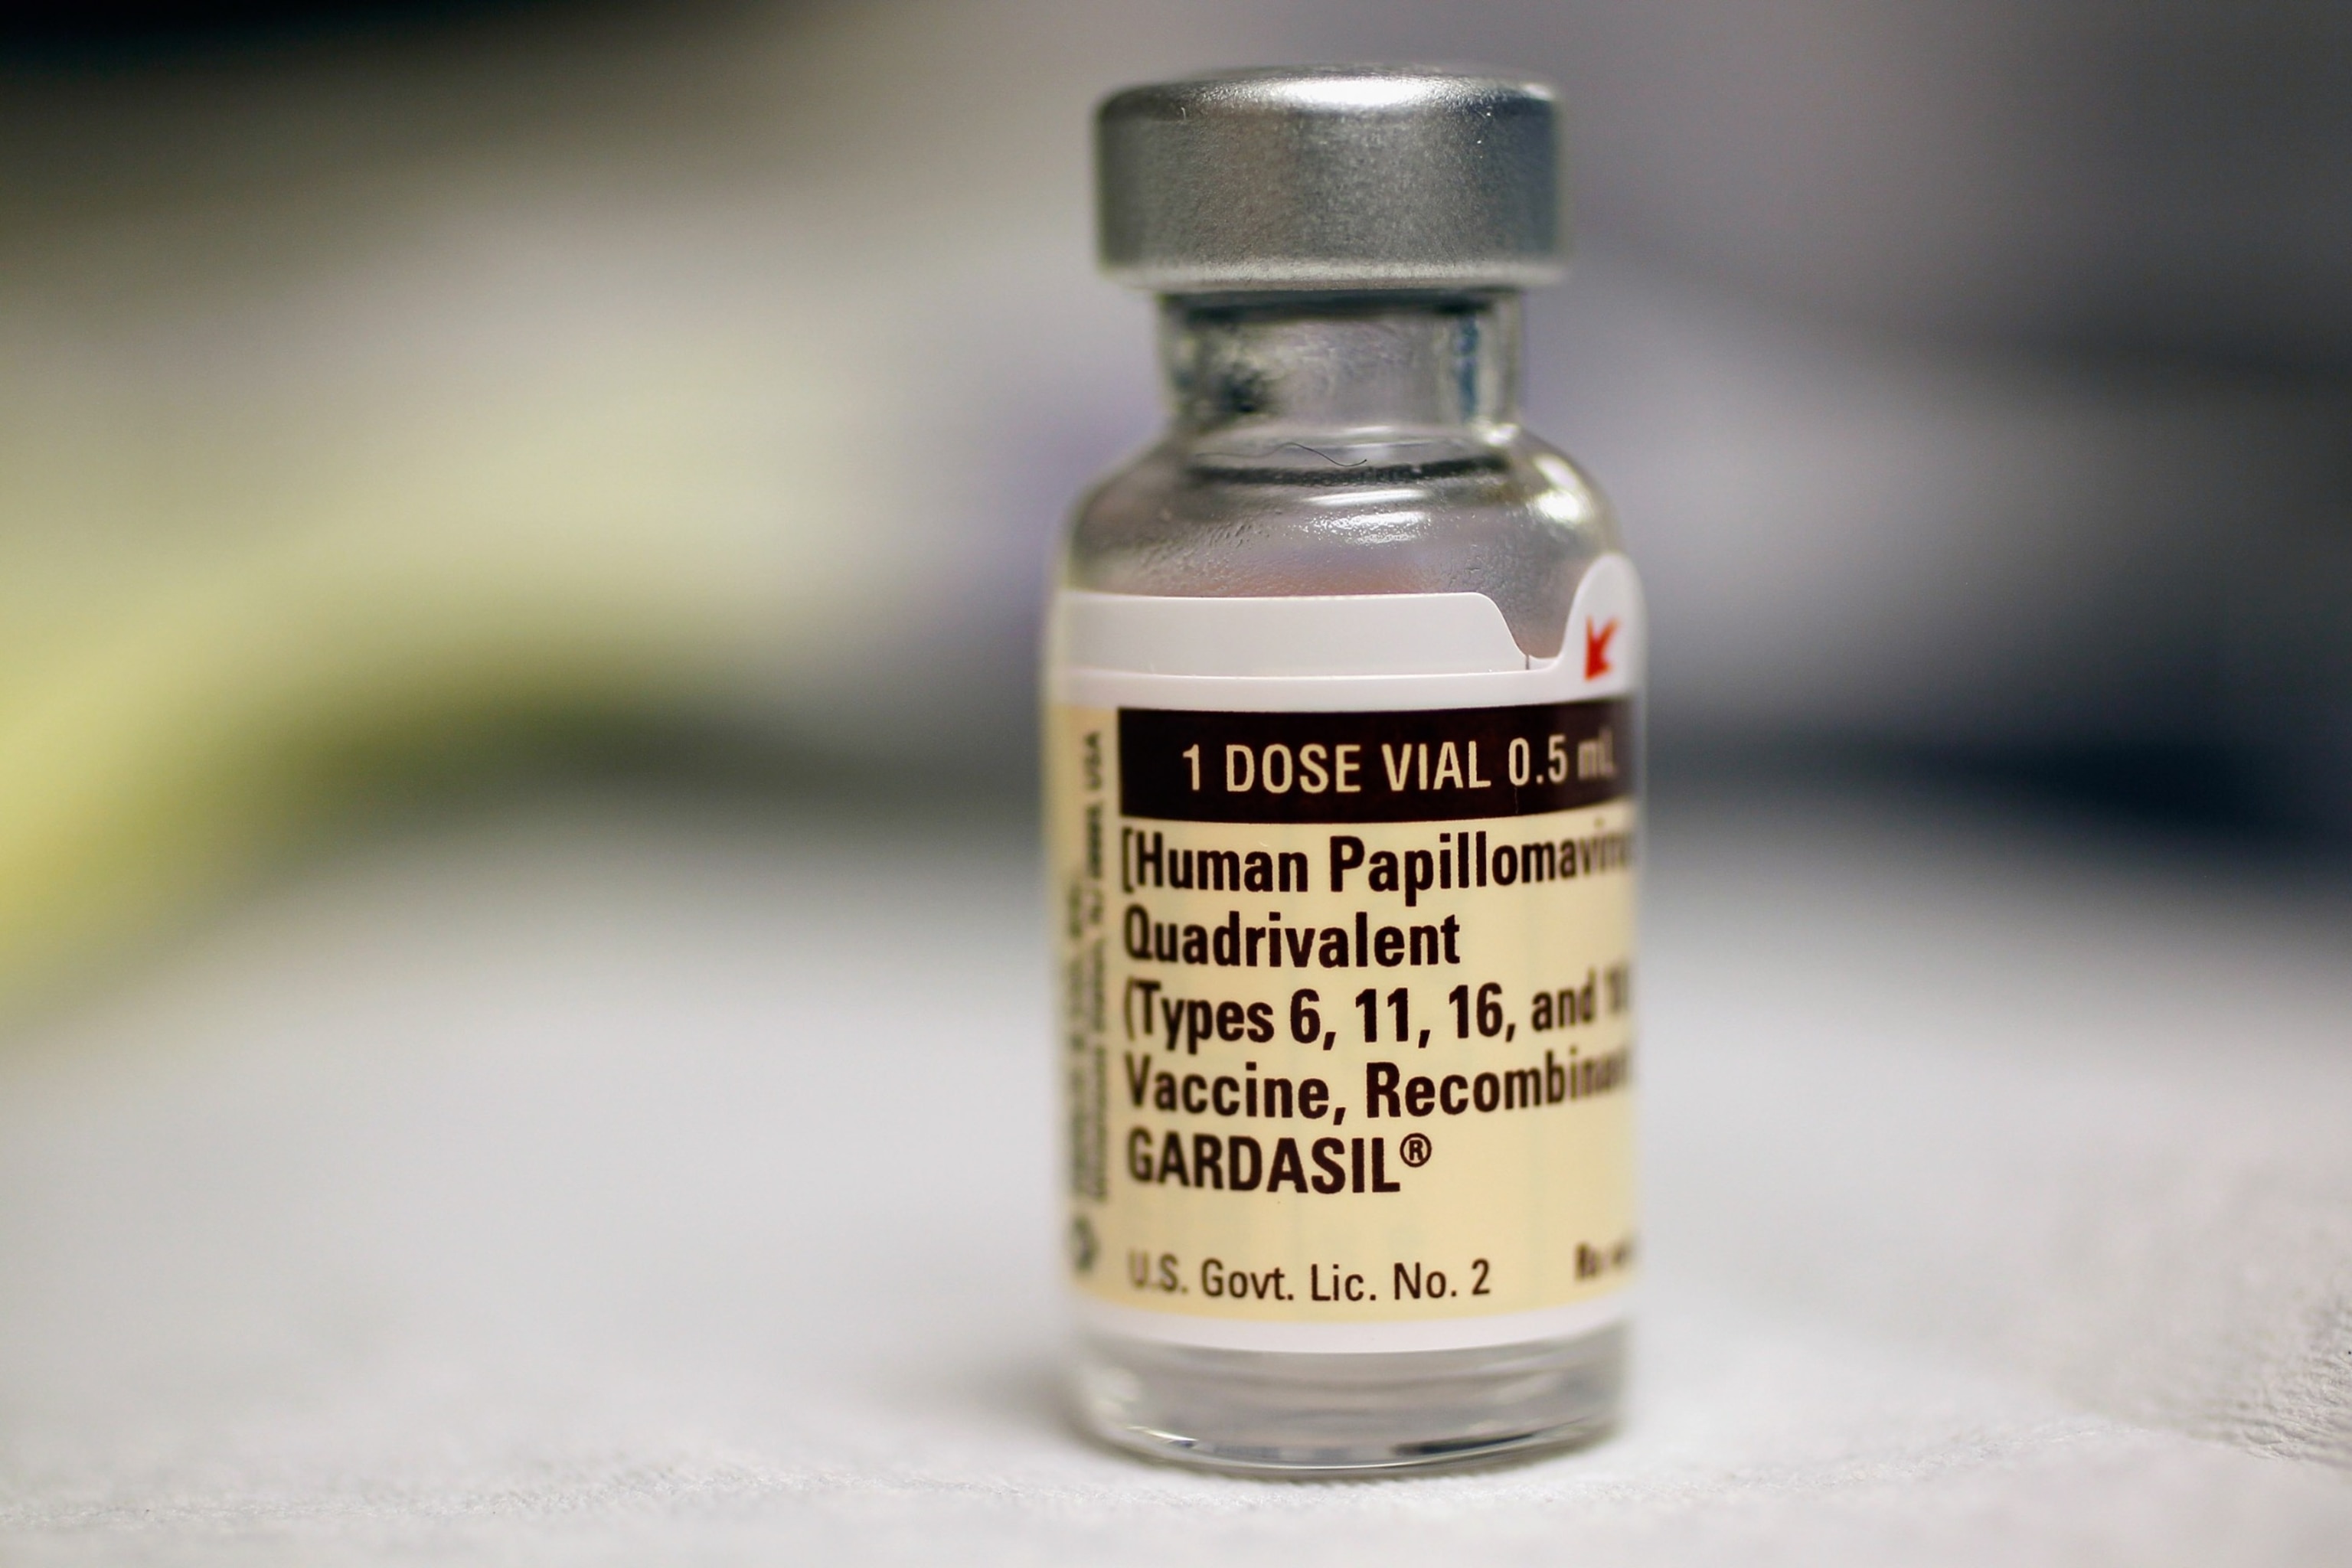 PHOTO: A bottle of the Human Papillomavirus vaccination is seen at the University of Miami Miller School of Medicine in Miami, FL, Sep. 21, 2011.